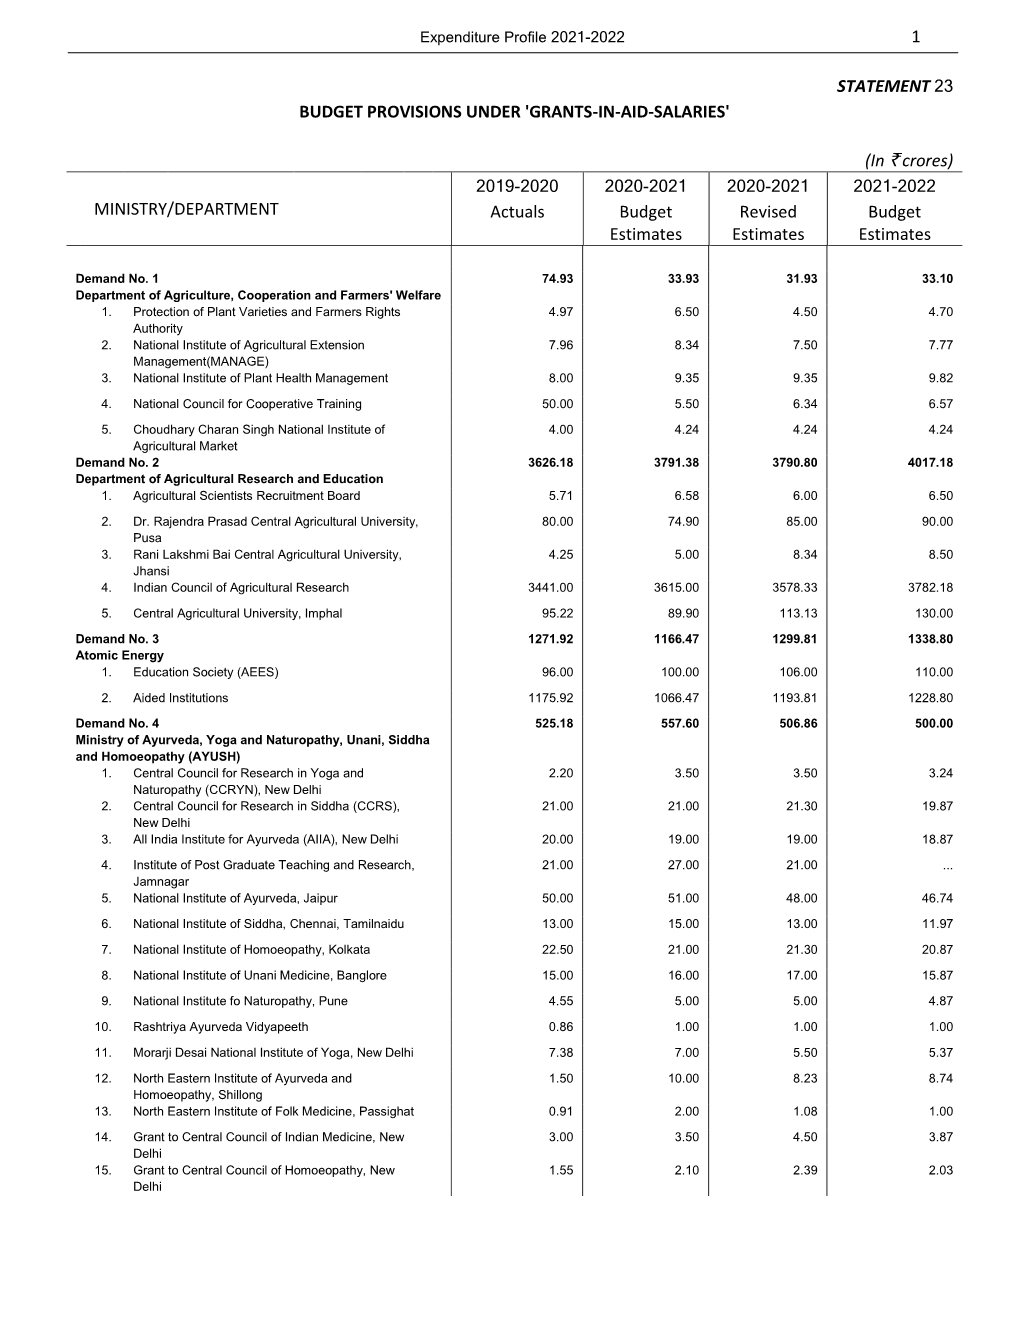 Budget Provisions Under "Grant-In-Aid Salaries"